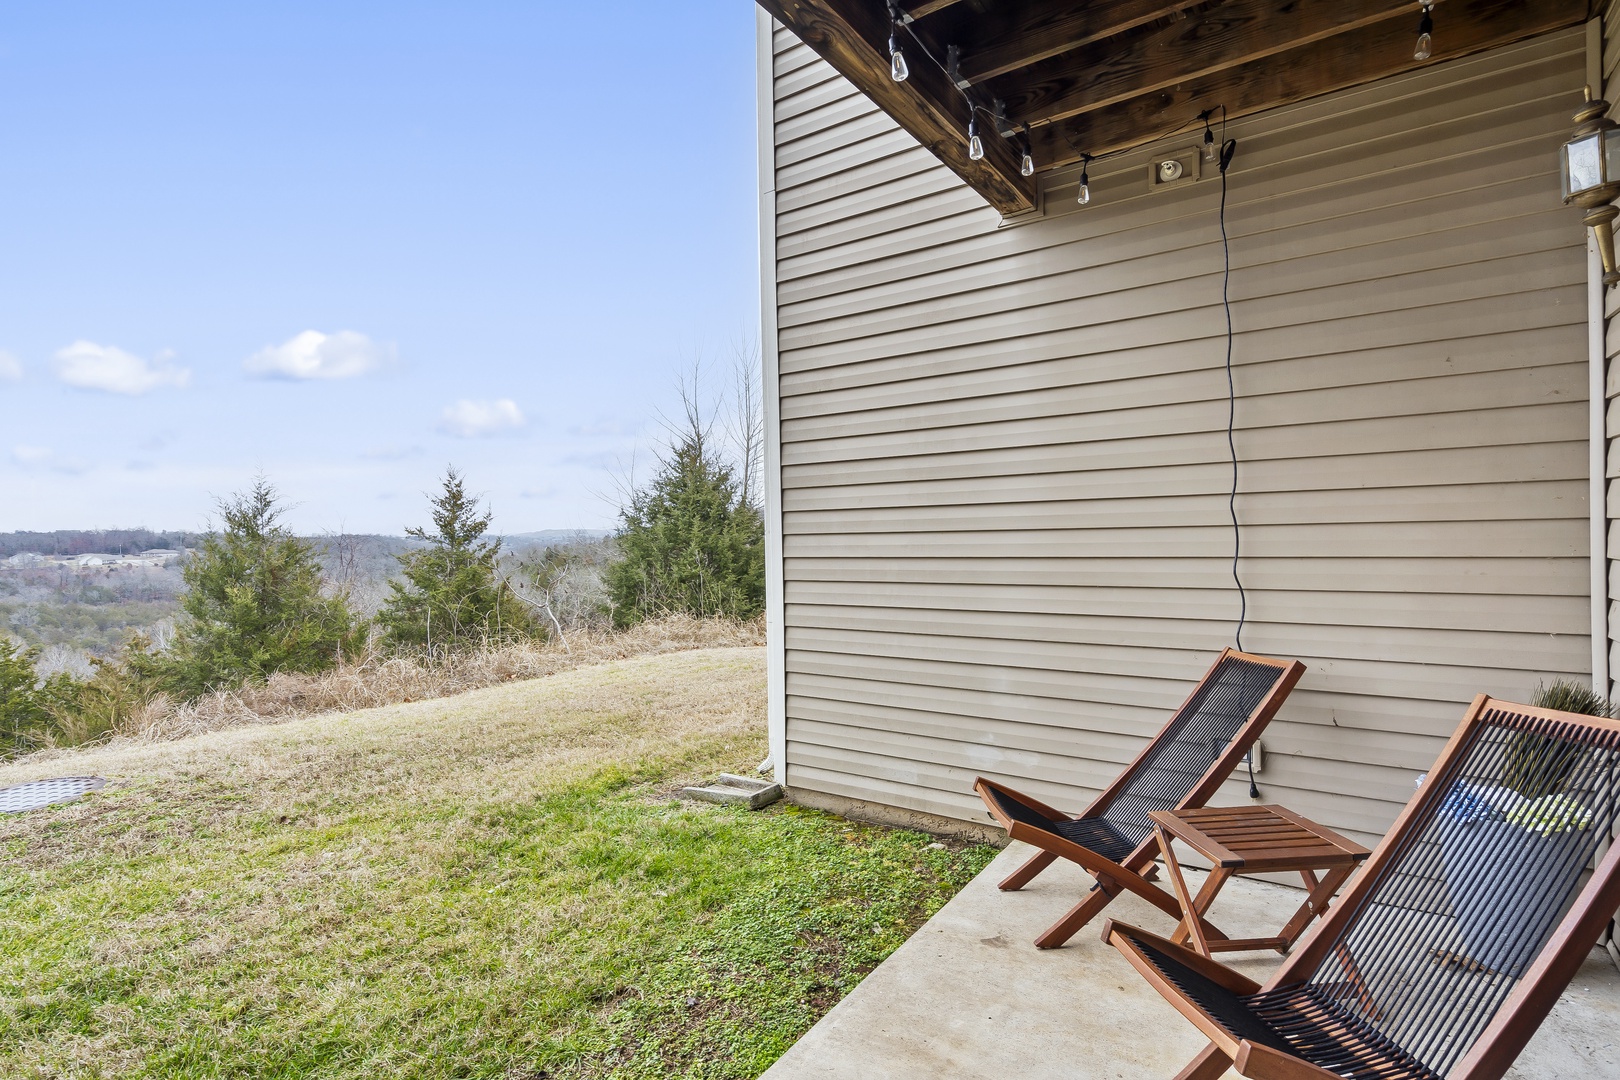 Retreat to the outdoor patio and soak in the scenic views